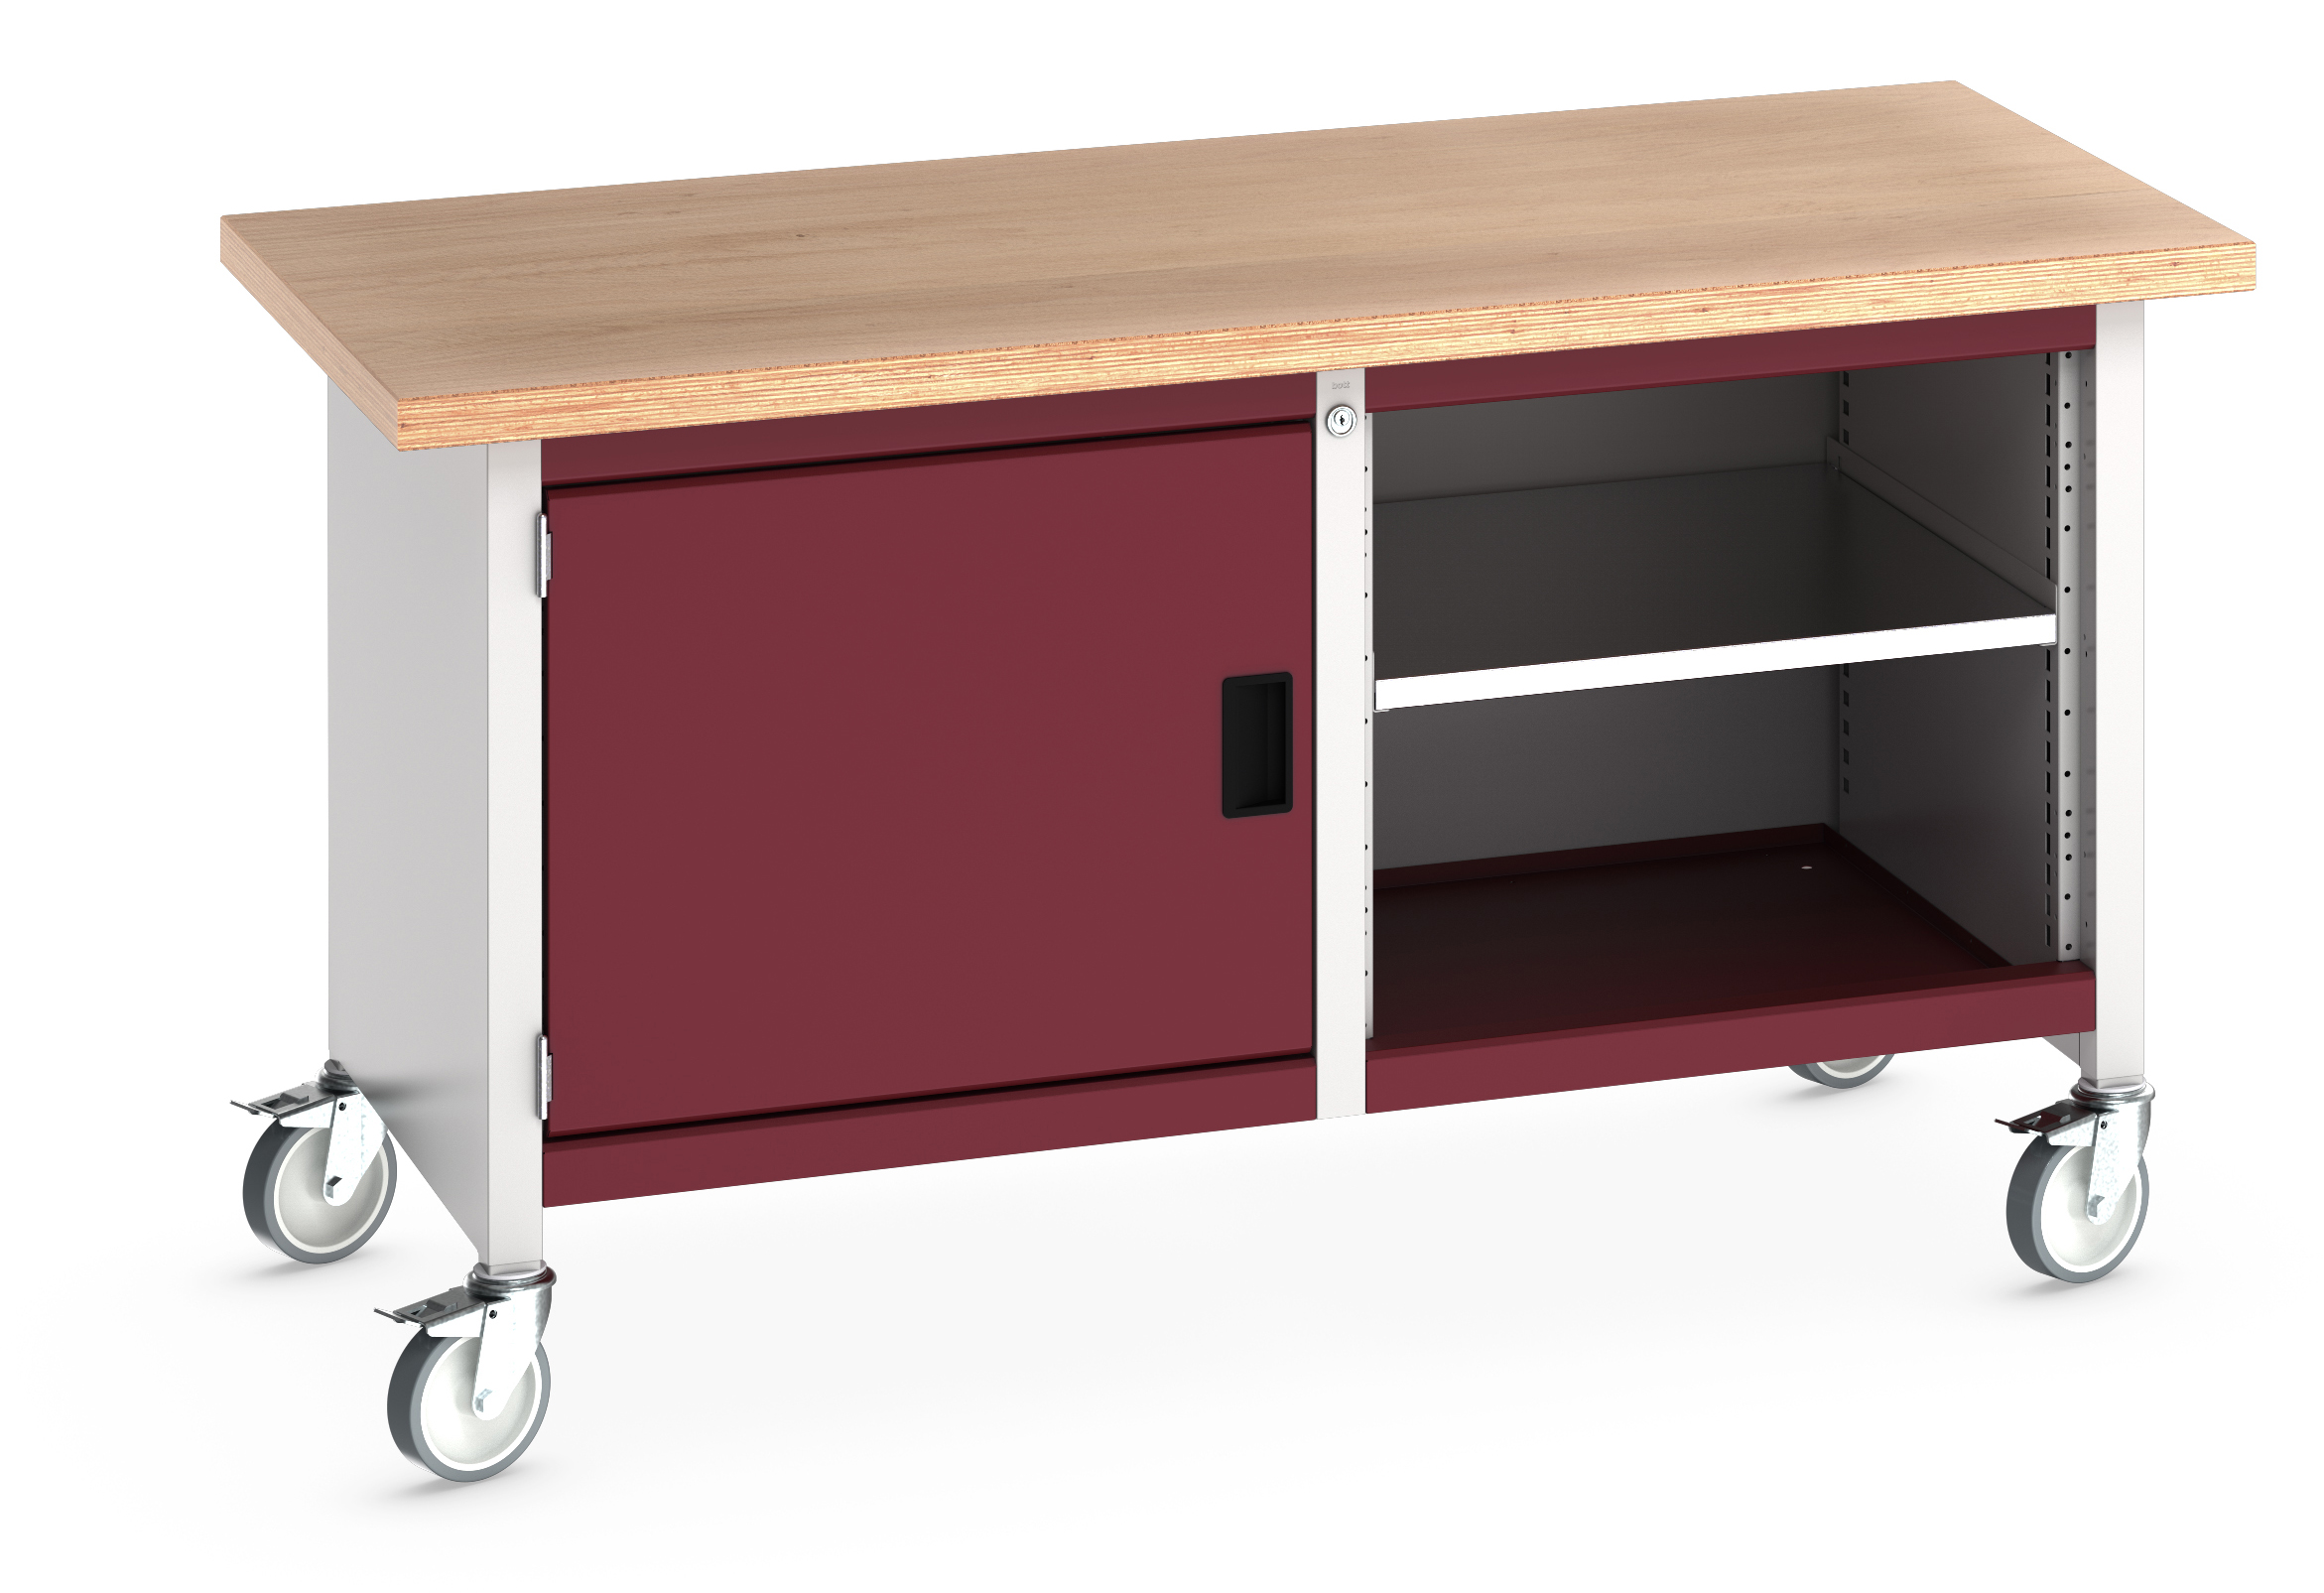 Bott Cubio Mobile Storage Bench With Full Cupboard / Open Cupboard - 41002094.24V